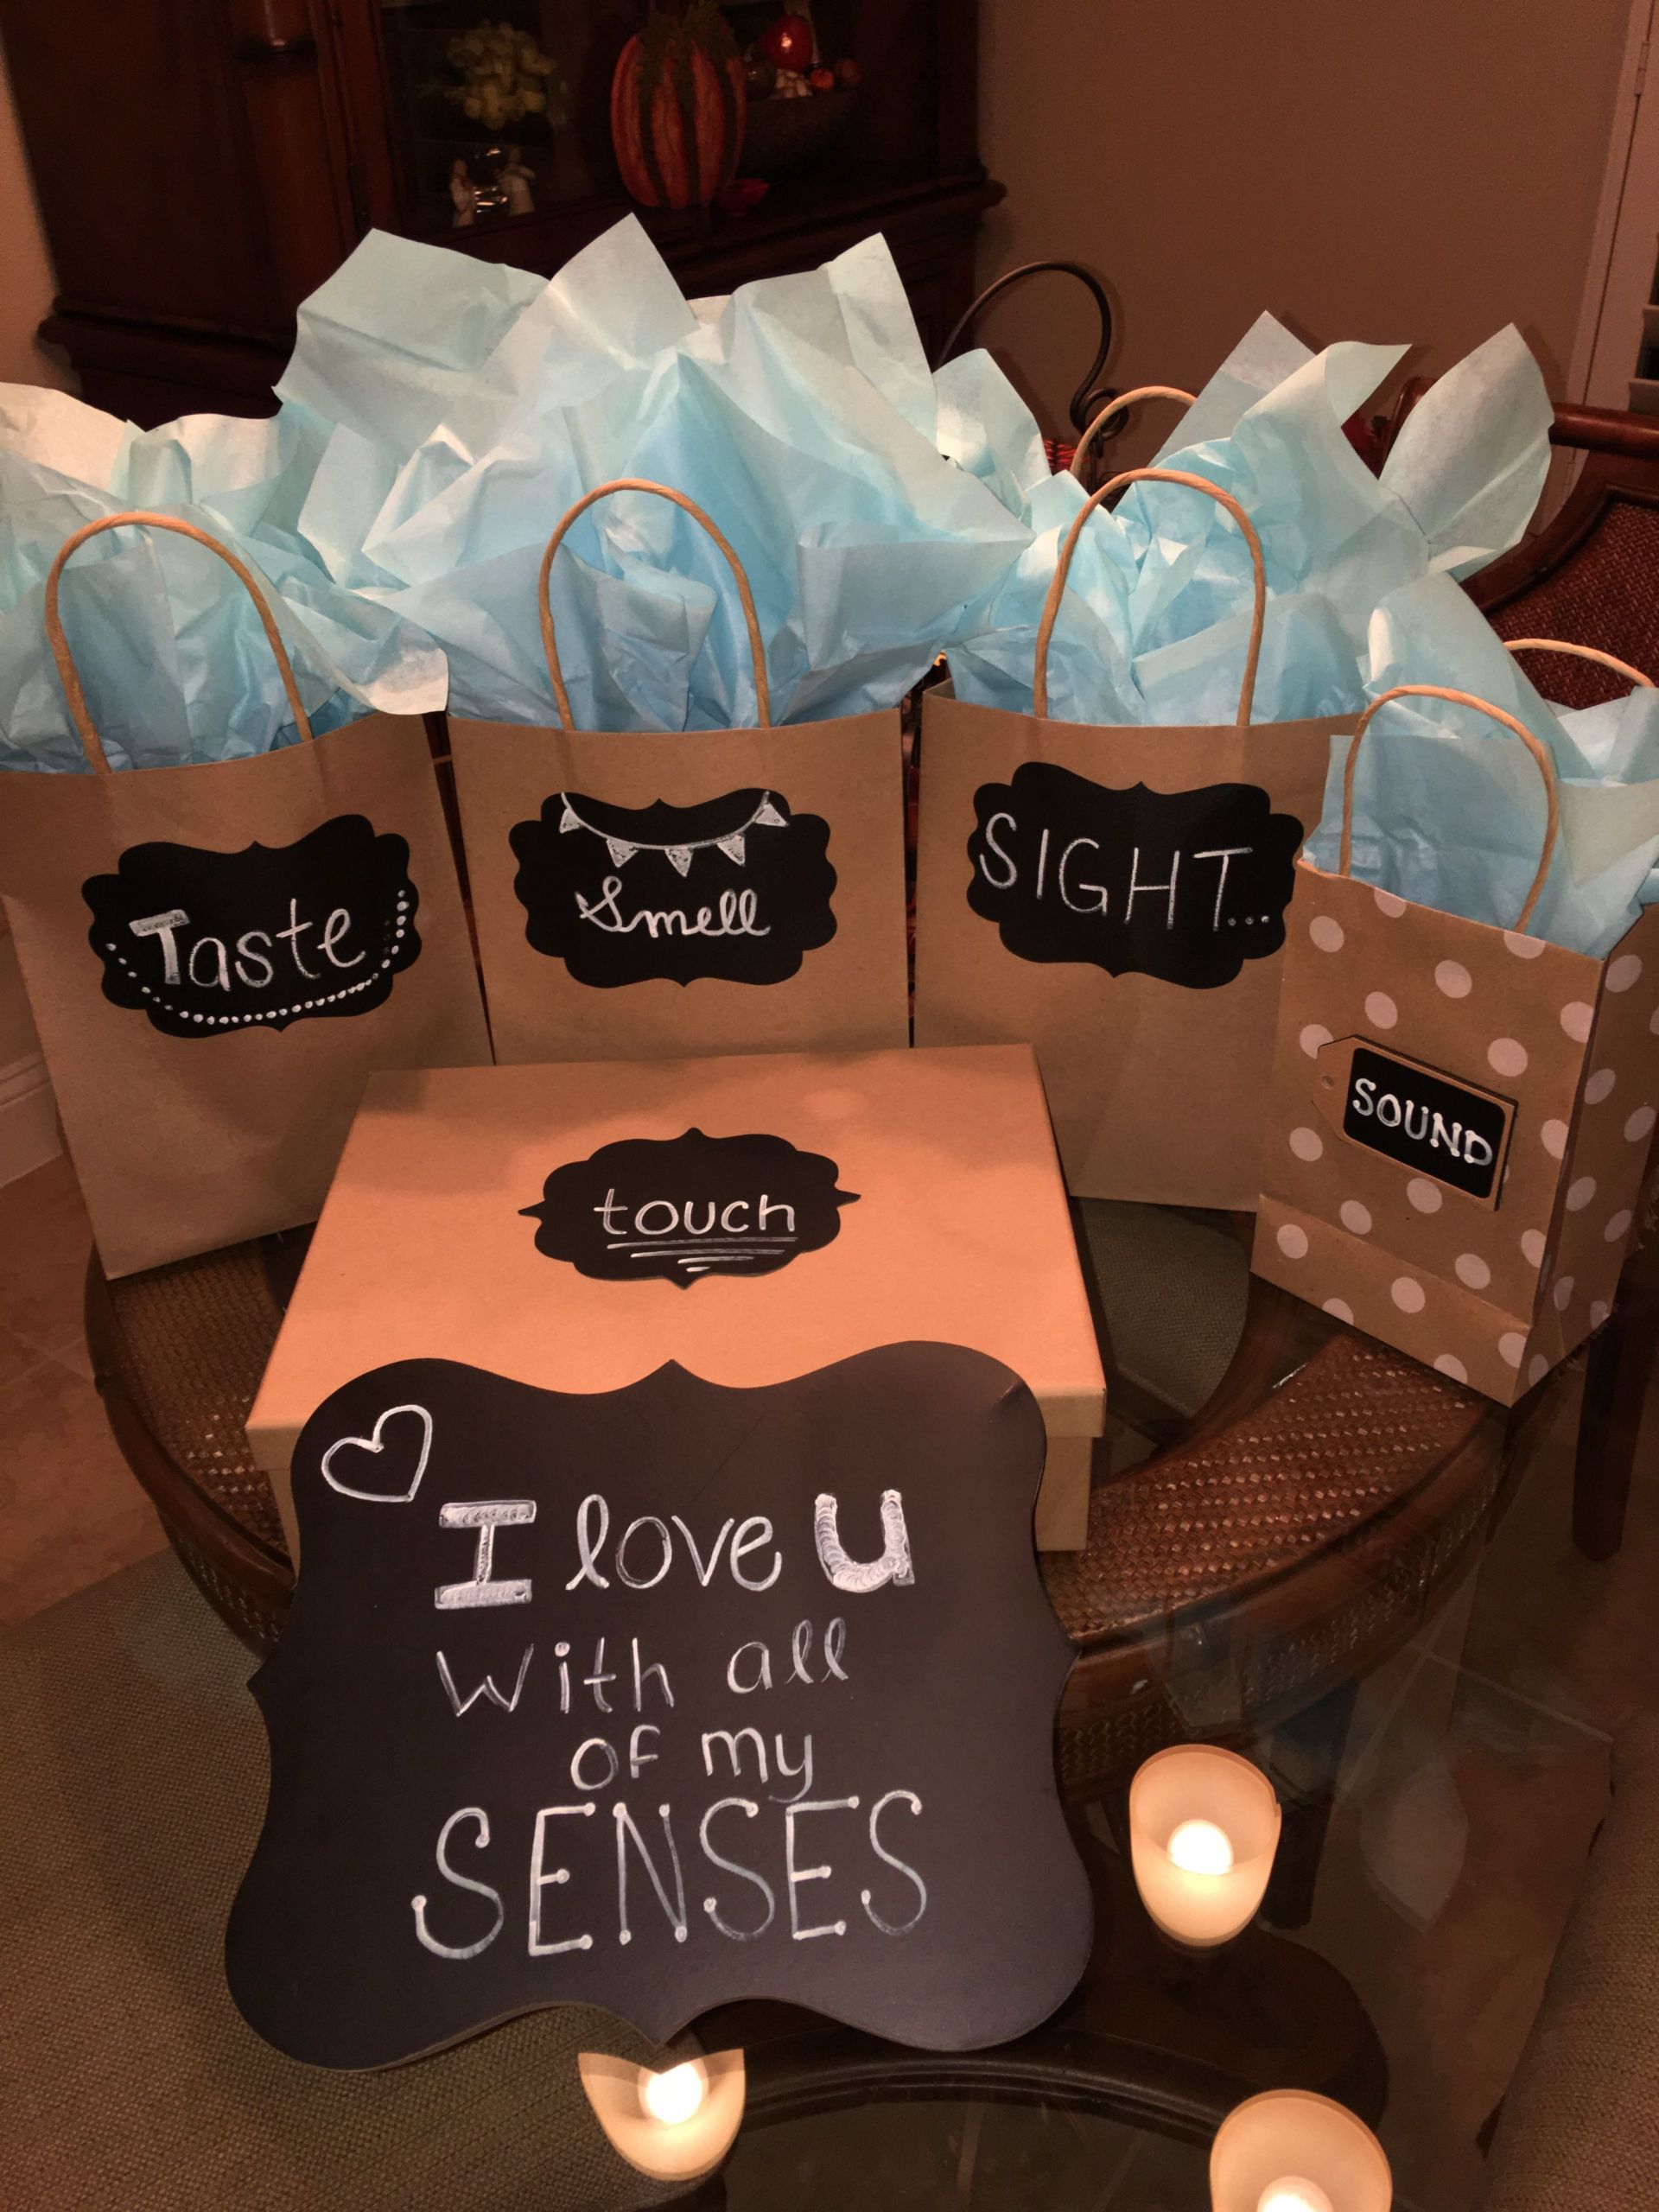 Diy Gift Ideas For Girlfriend
 I love you with all of my senses my version for my